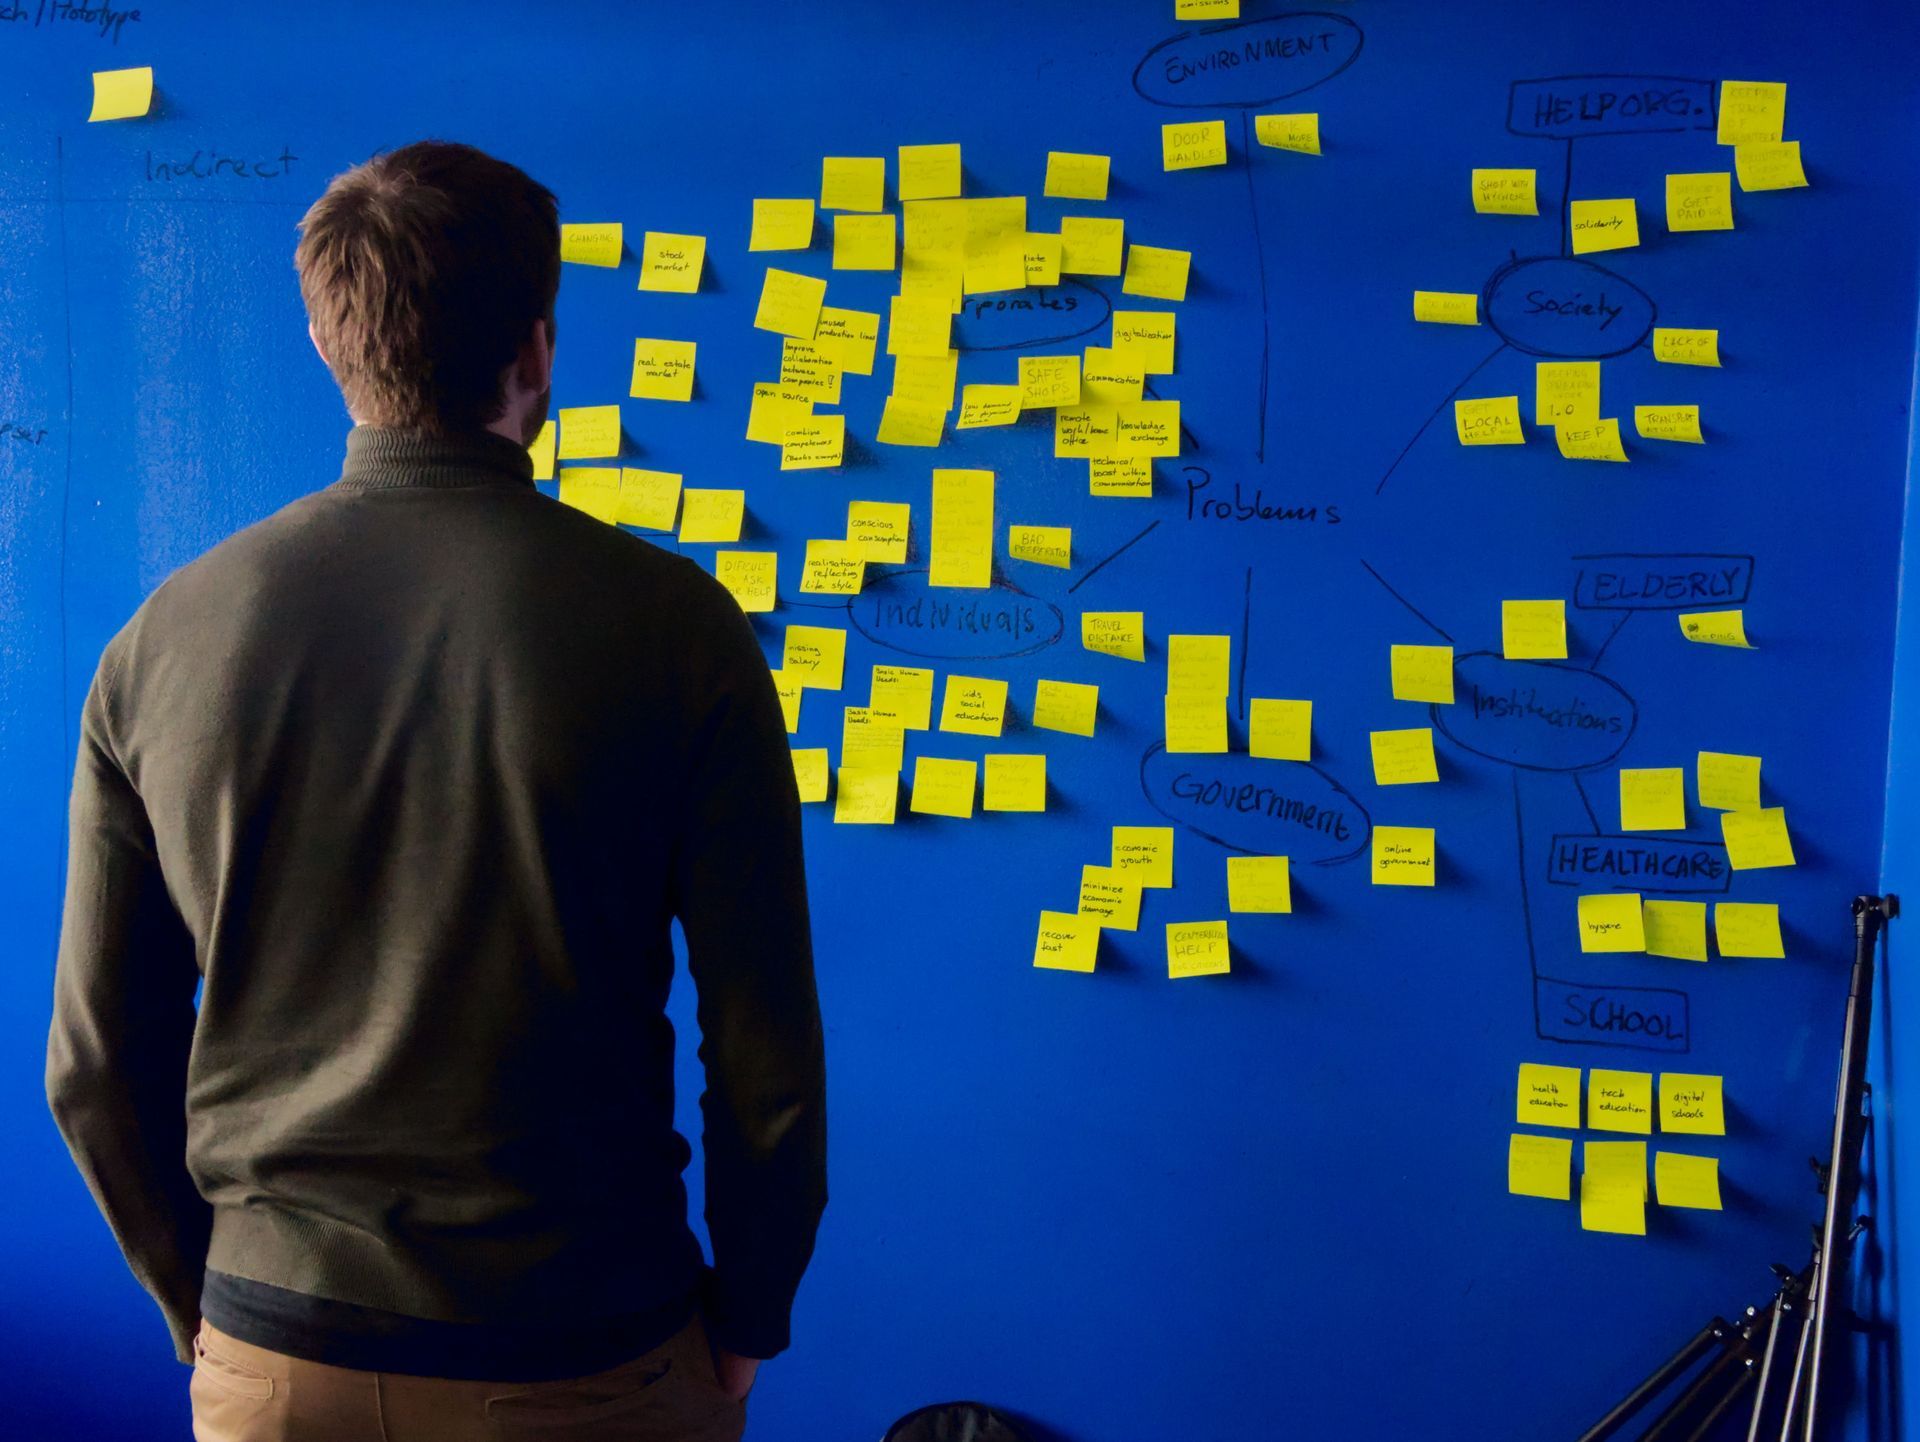 A man is standing in front of a blue wall with sticky notes on it.